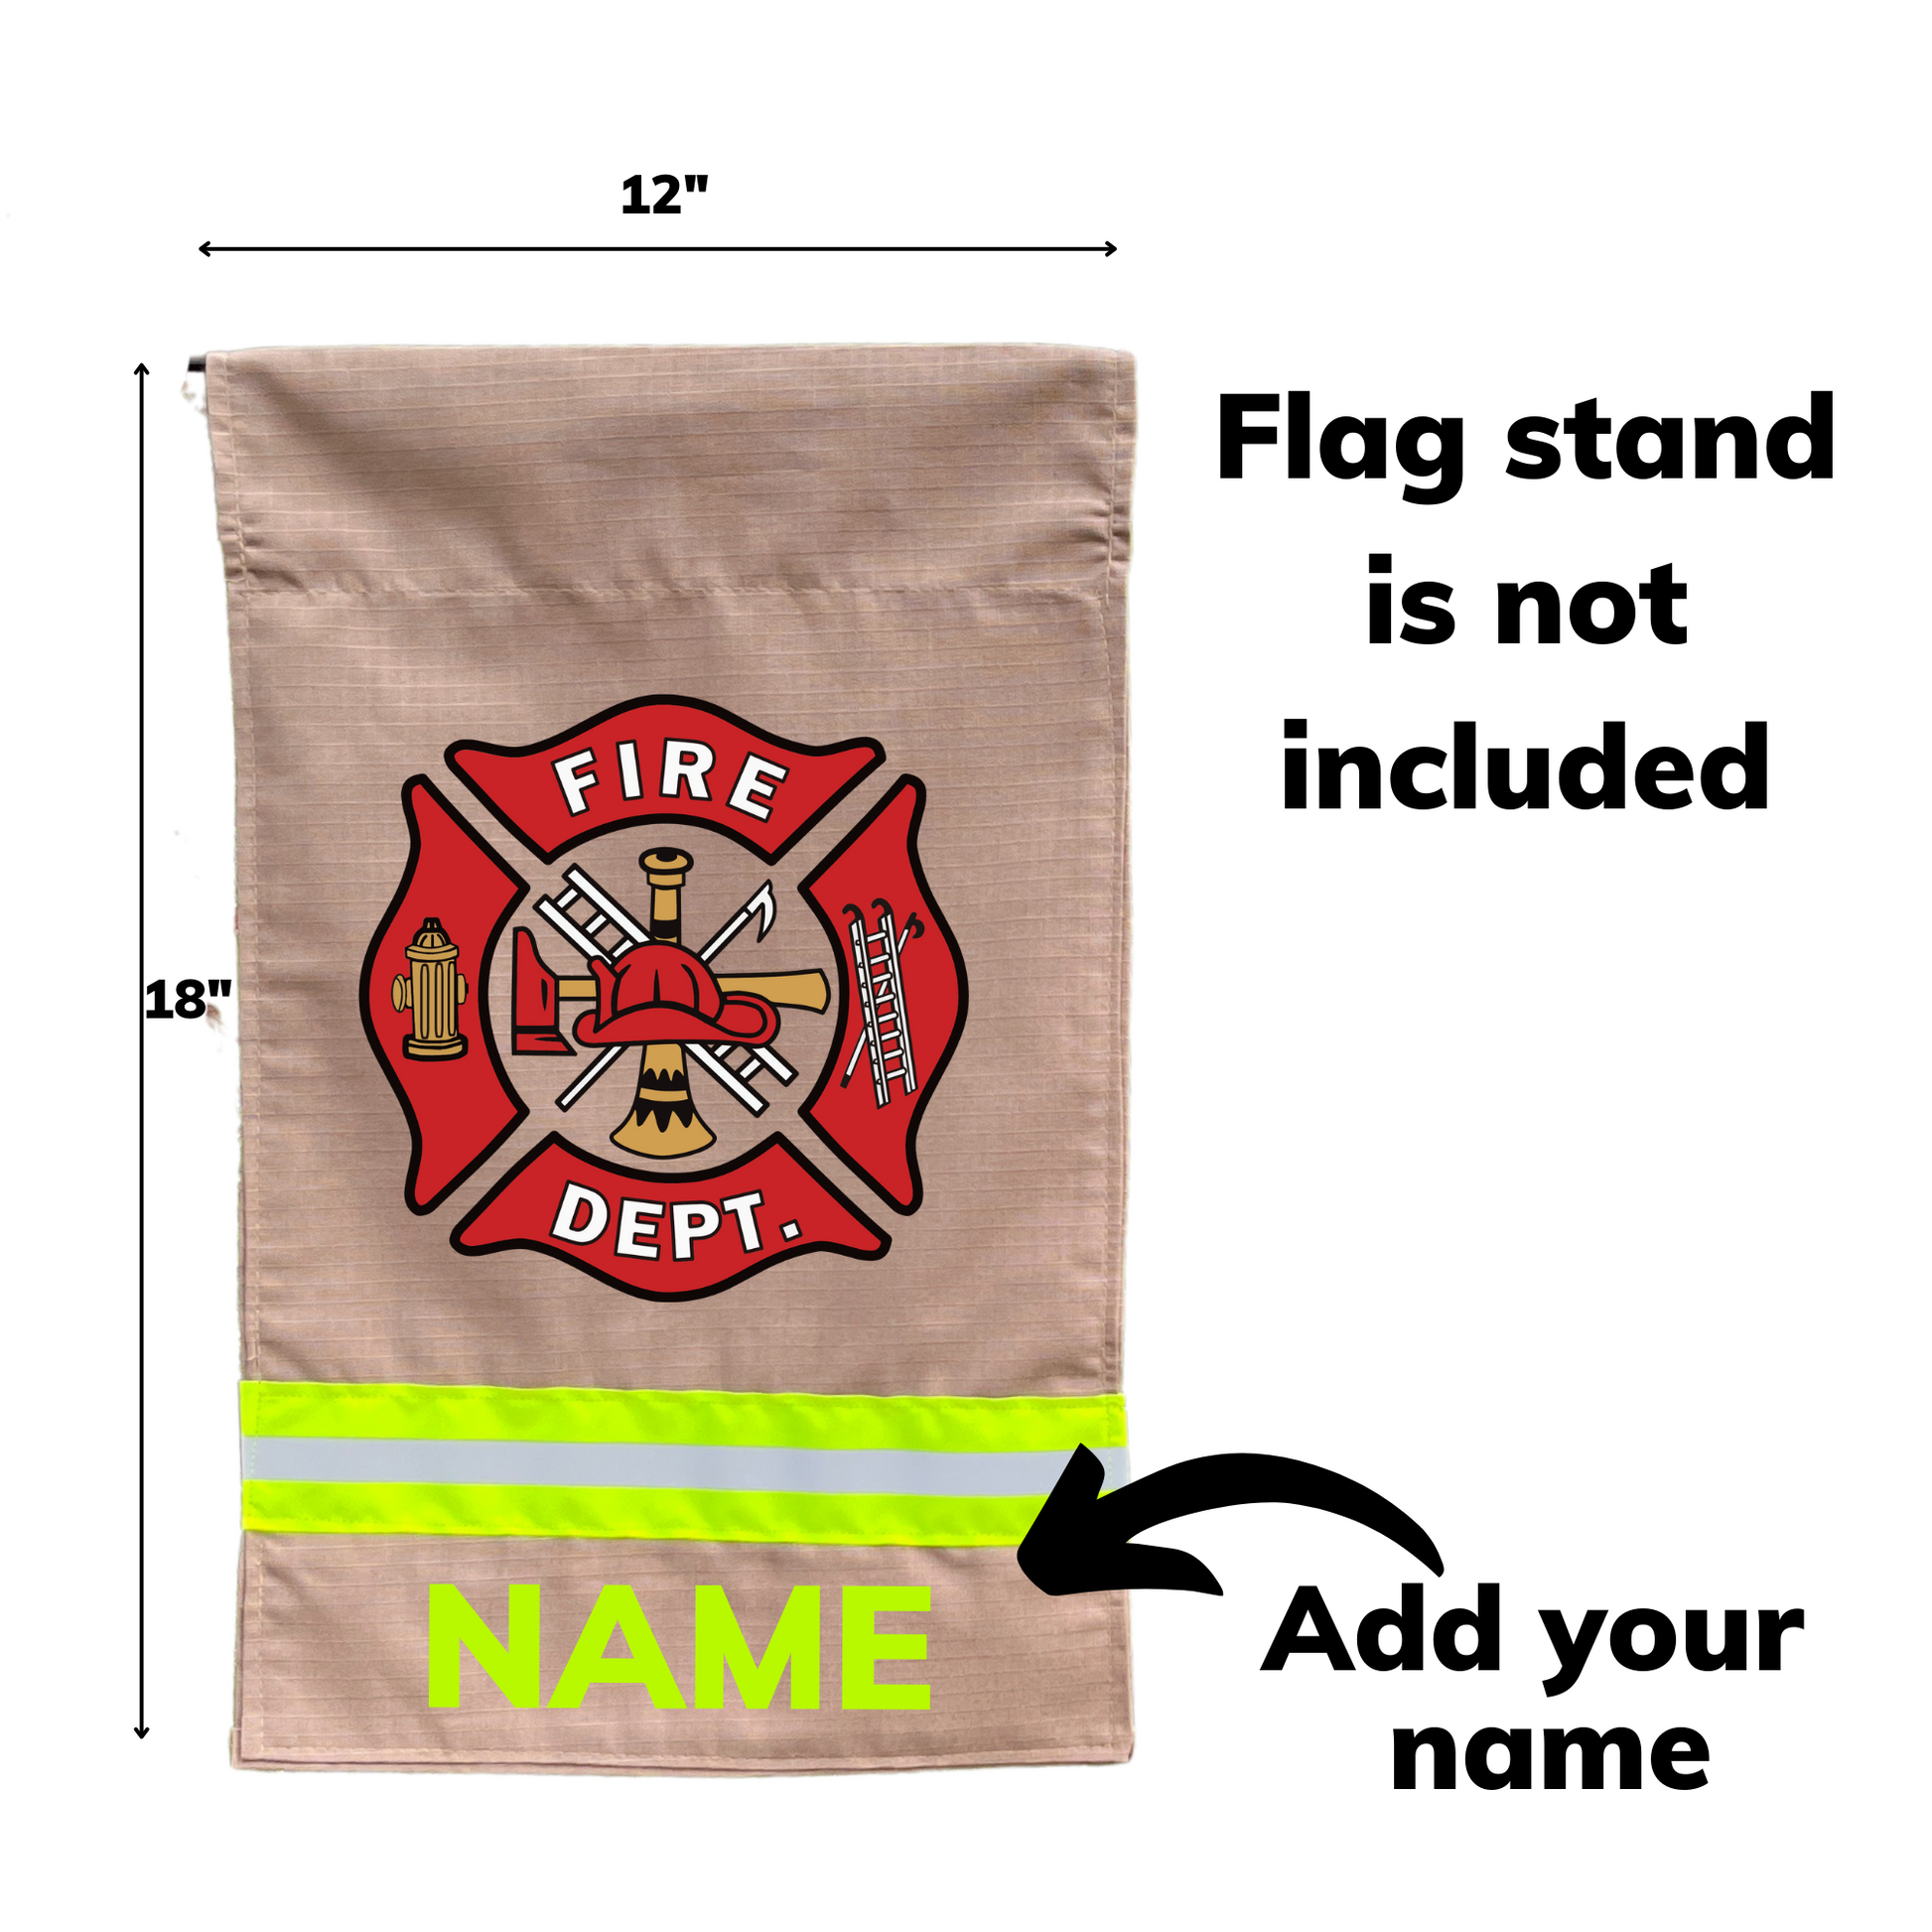 Firefighter maltese cross garden flag. flag is in tan fabric and neon yellow reflective tape  size is 12 inches by 18 inches flag stand not included.  add your name to the bottom of the flag